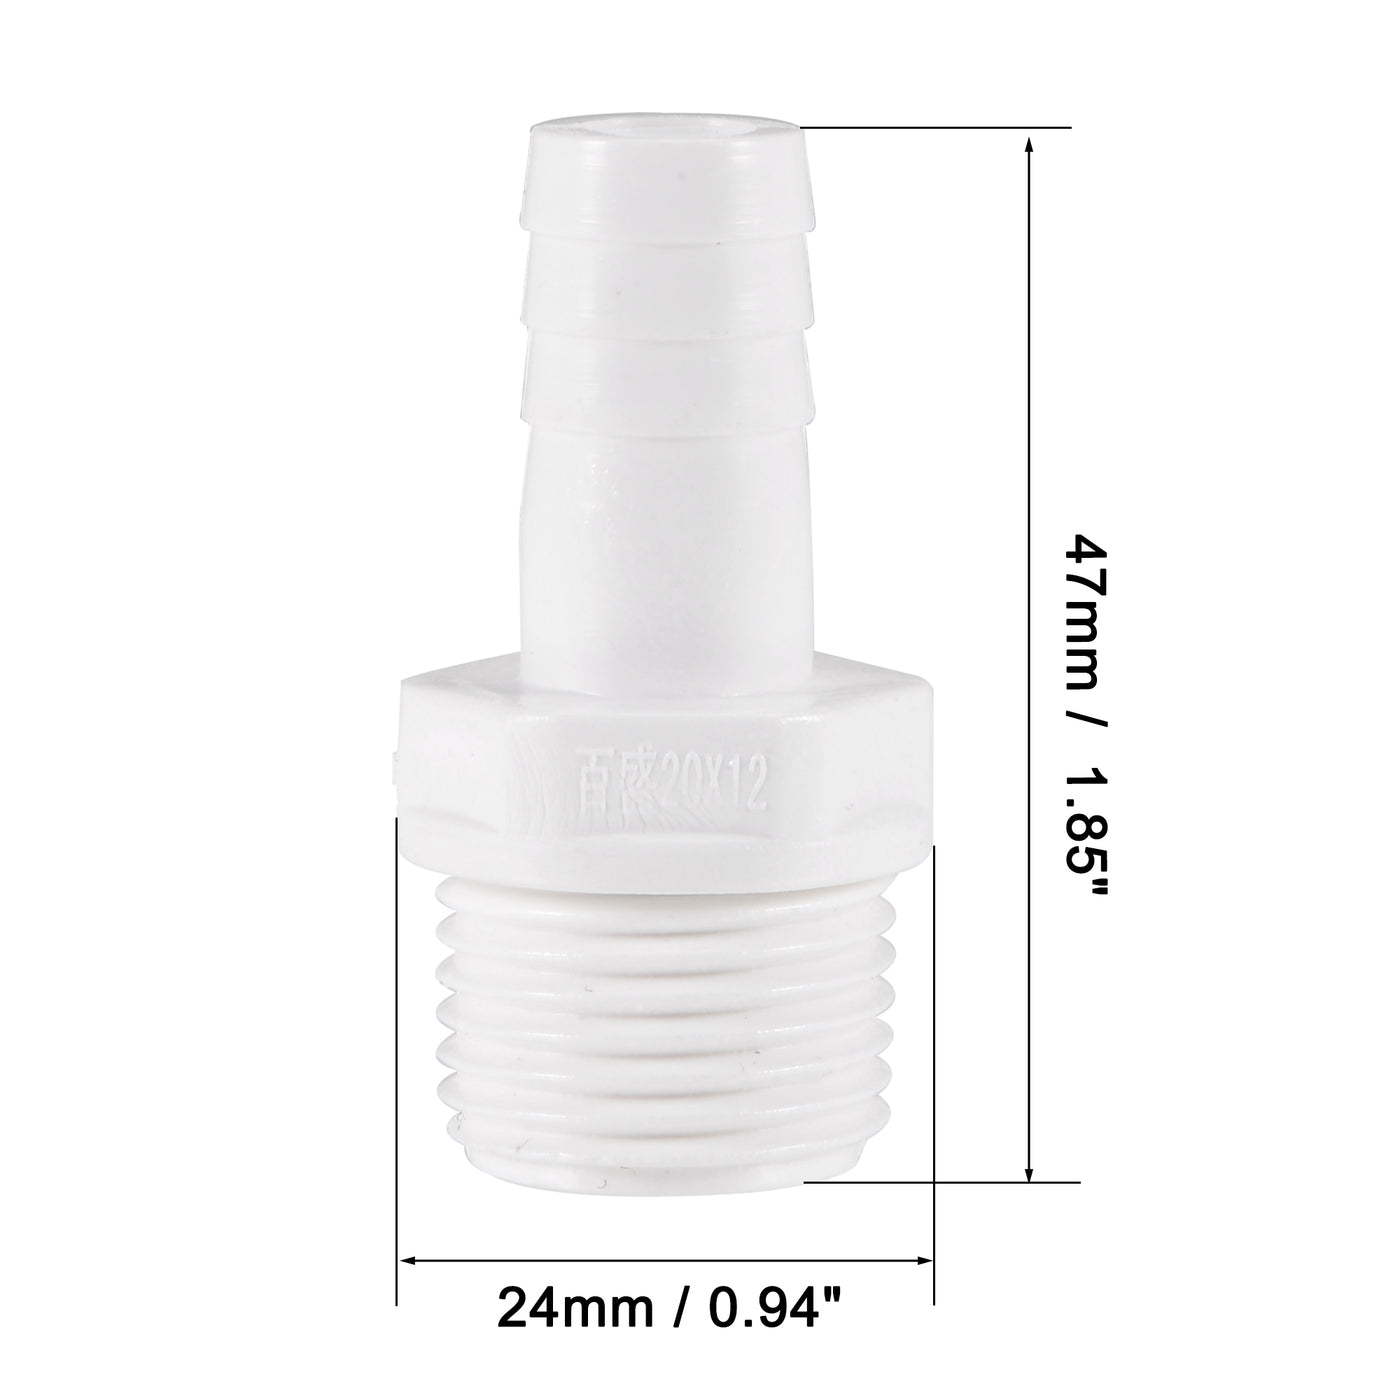 uxcell Uxcell PVC Tube Fitting Adapter 12mm Barbed x G1/2 Male White for Aquariums, Water Tanks, Tubs, Pools 2Pcs